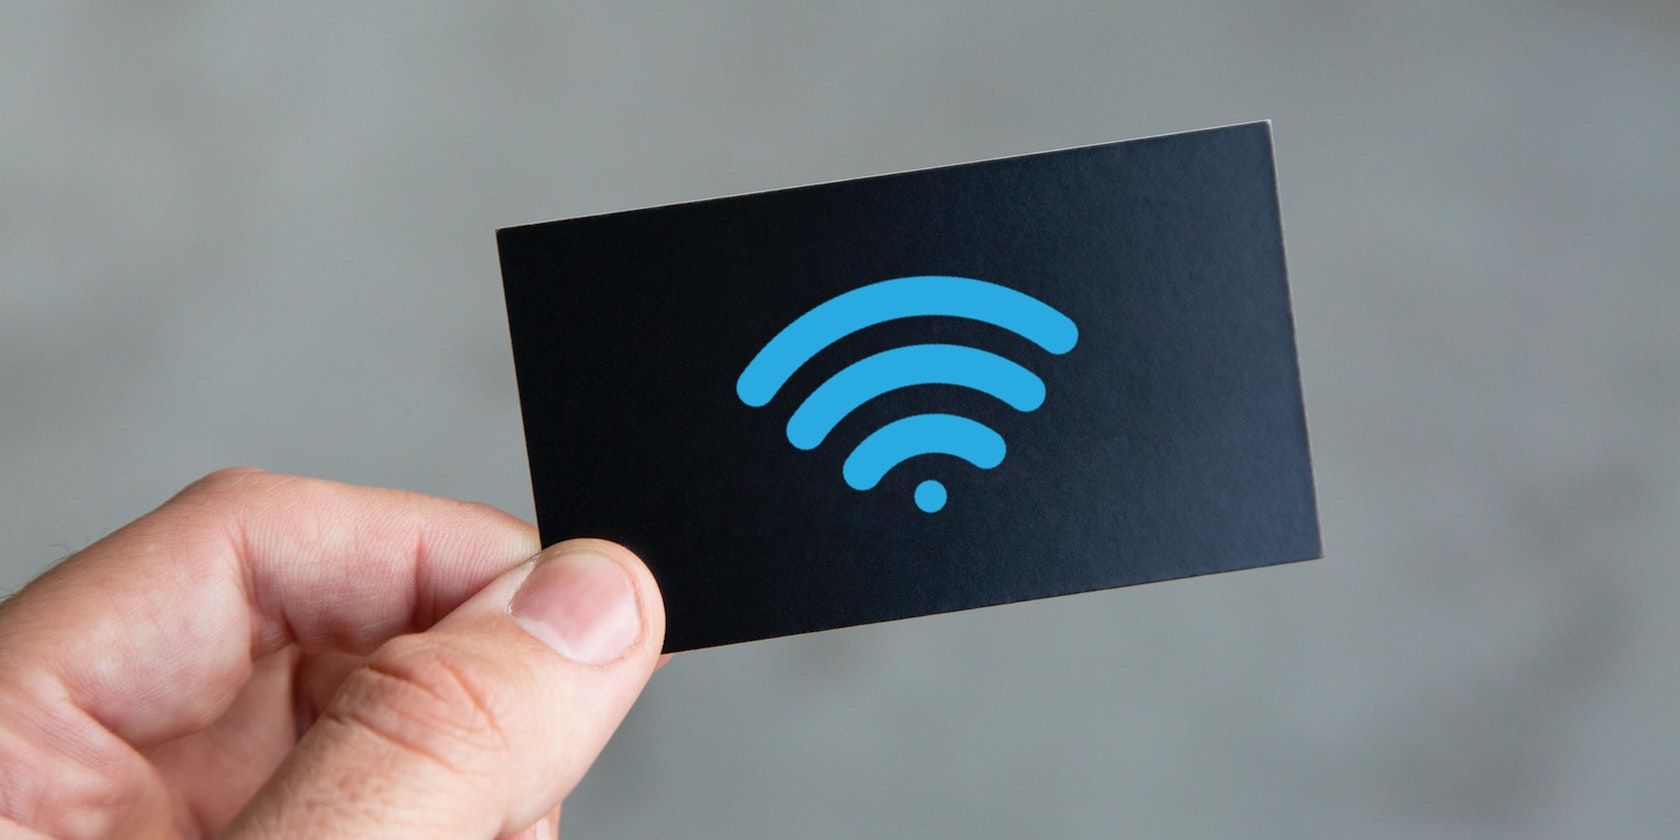 A hand holds a black business card that has a blue wireless symbol on it.